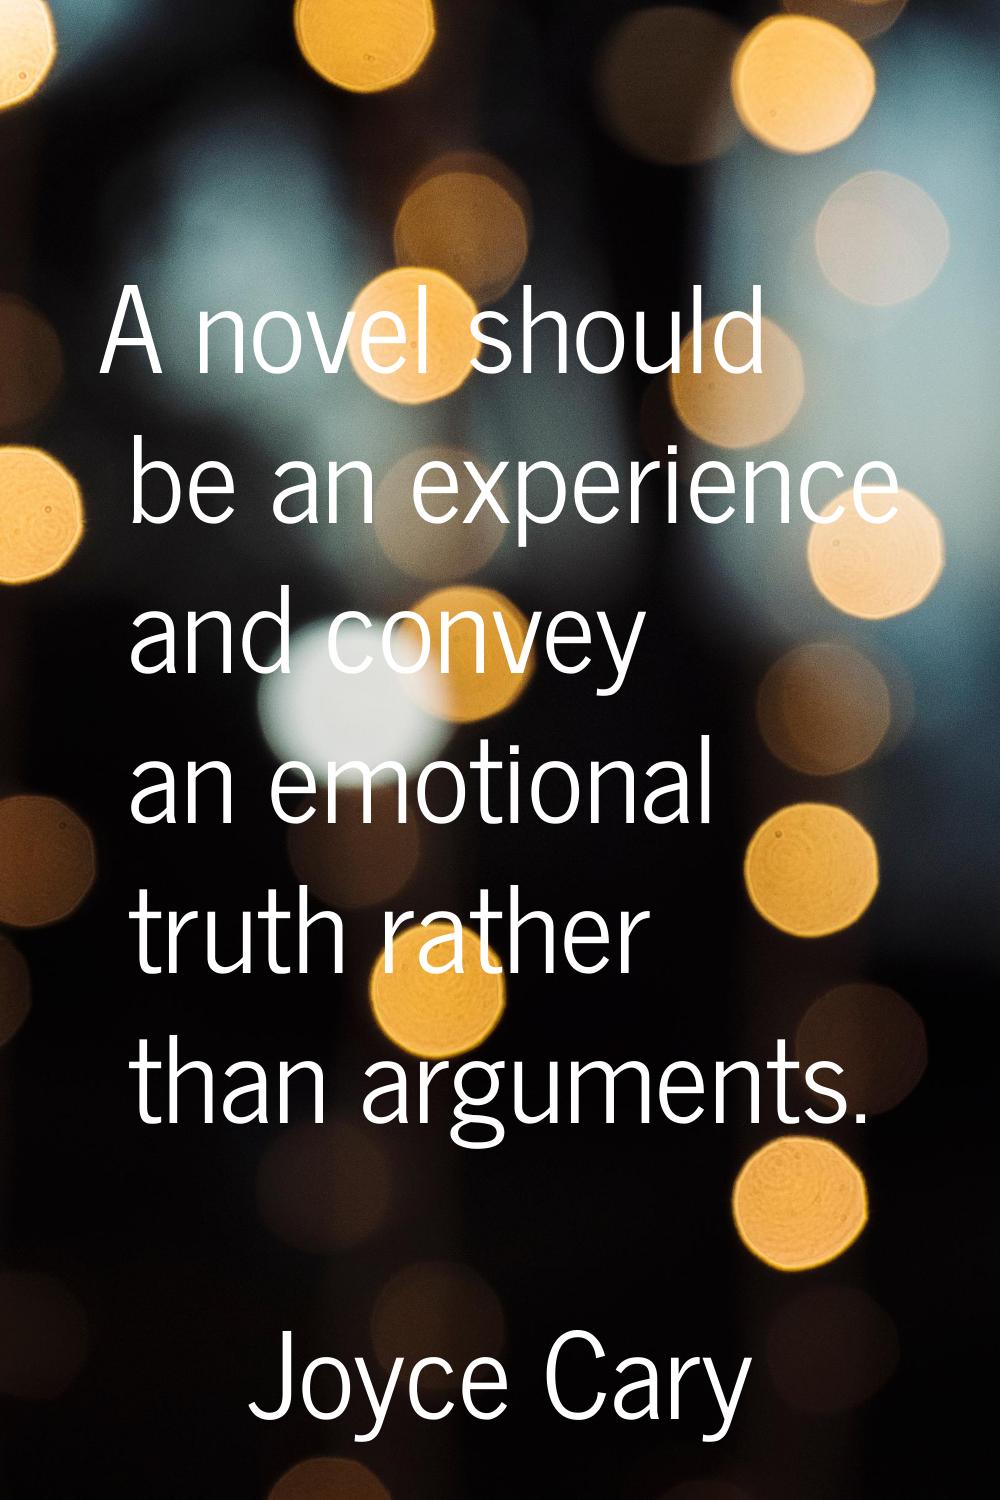 A novel should be an experience and convey an emotional truth rather than arguments.